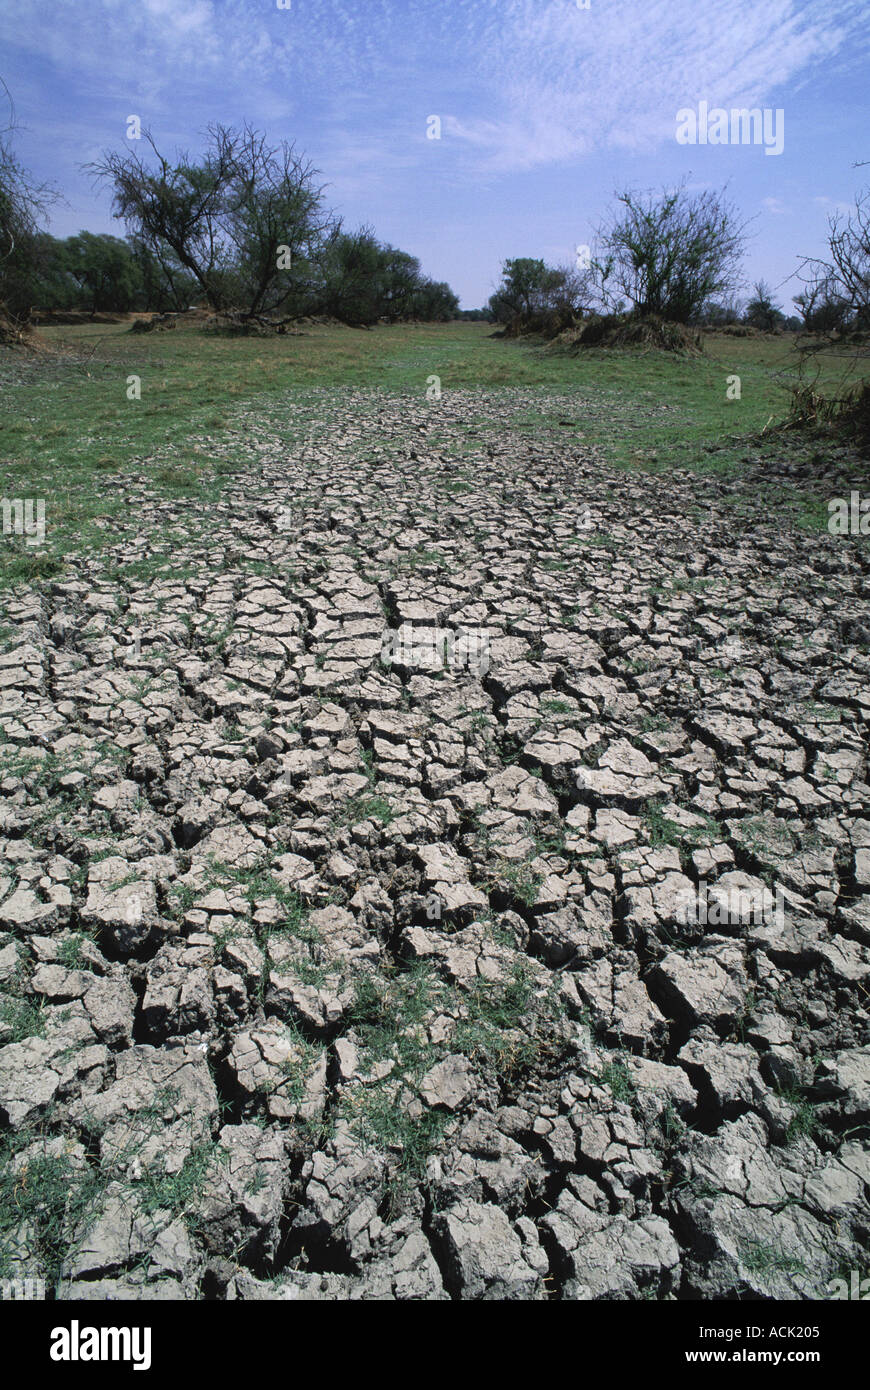 Cracked earth during severe drought in Keolado Ghana NP Rajasthan India Stock Photo